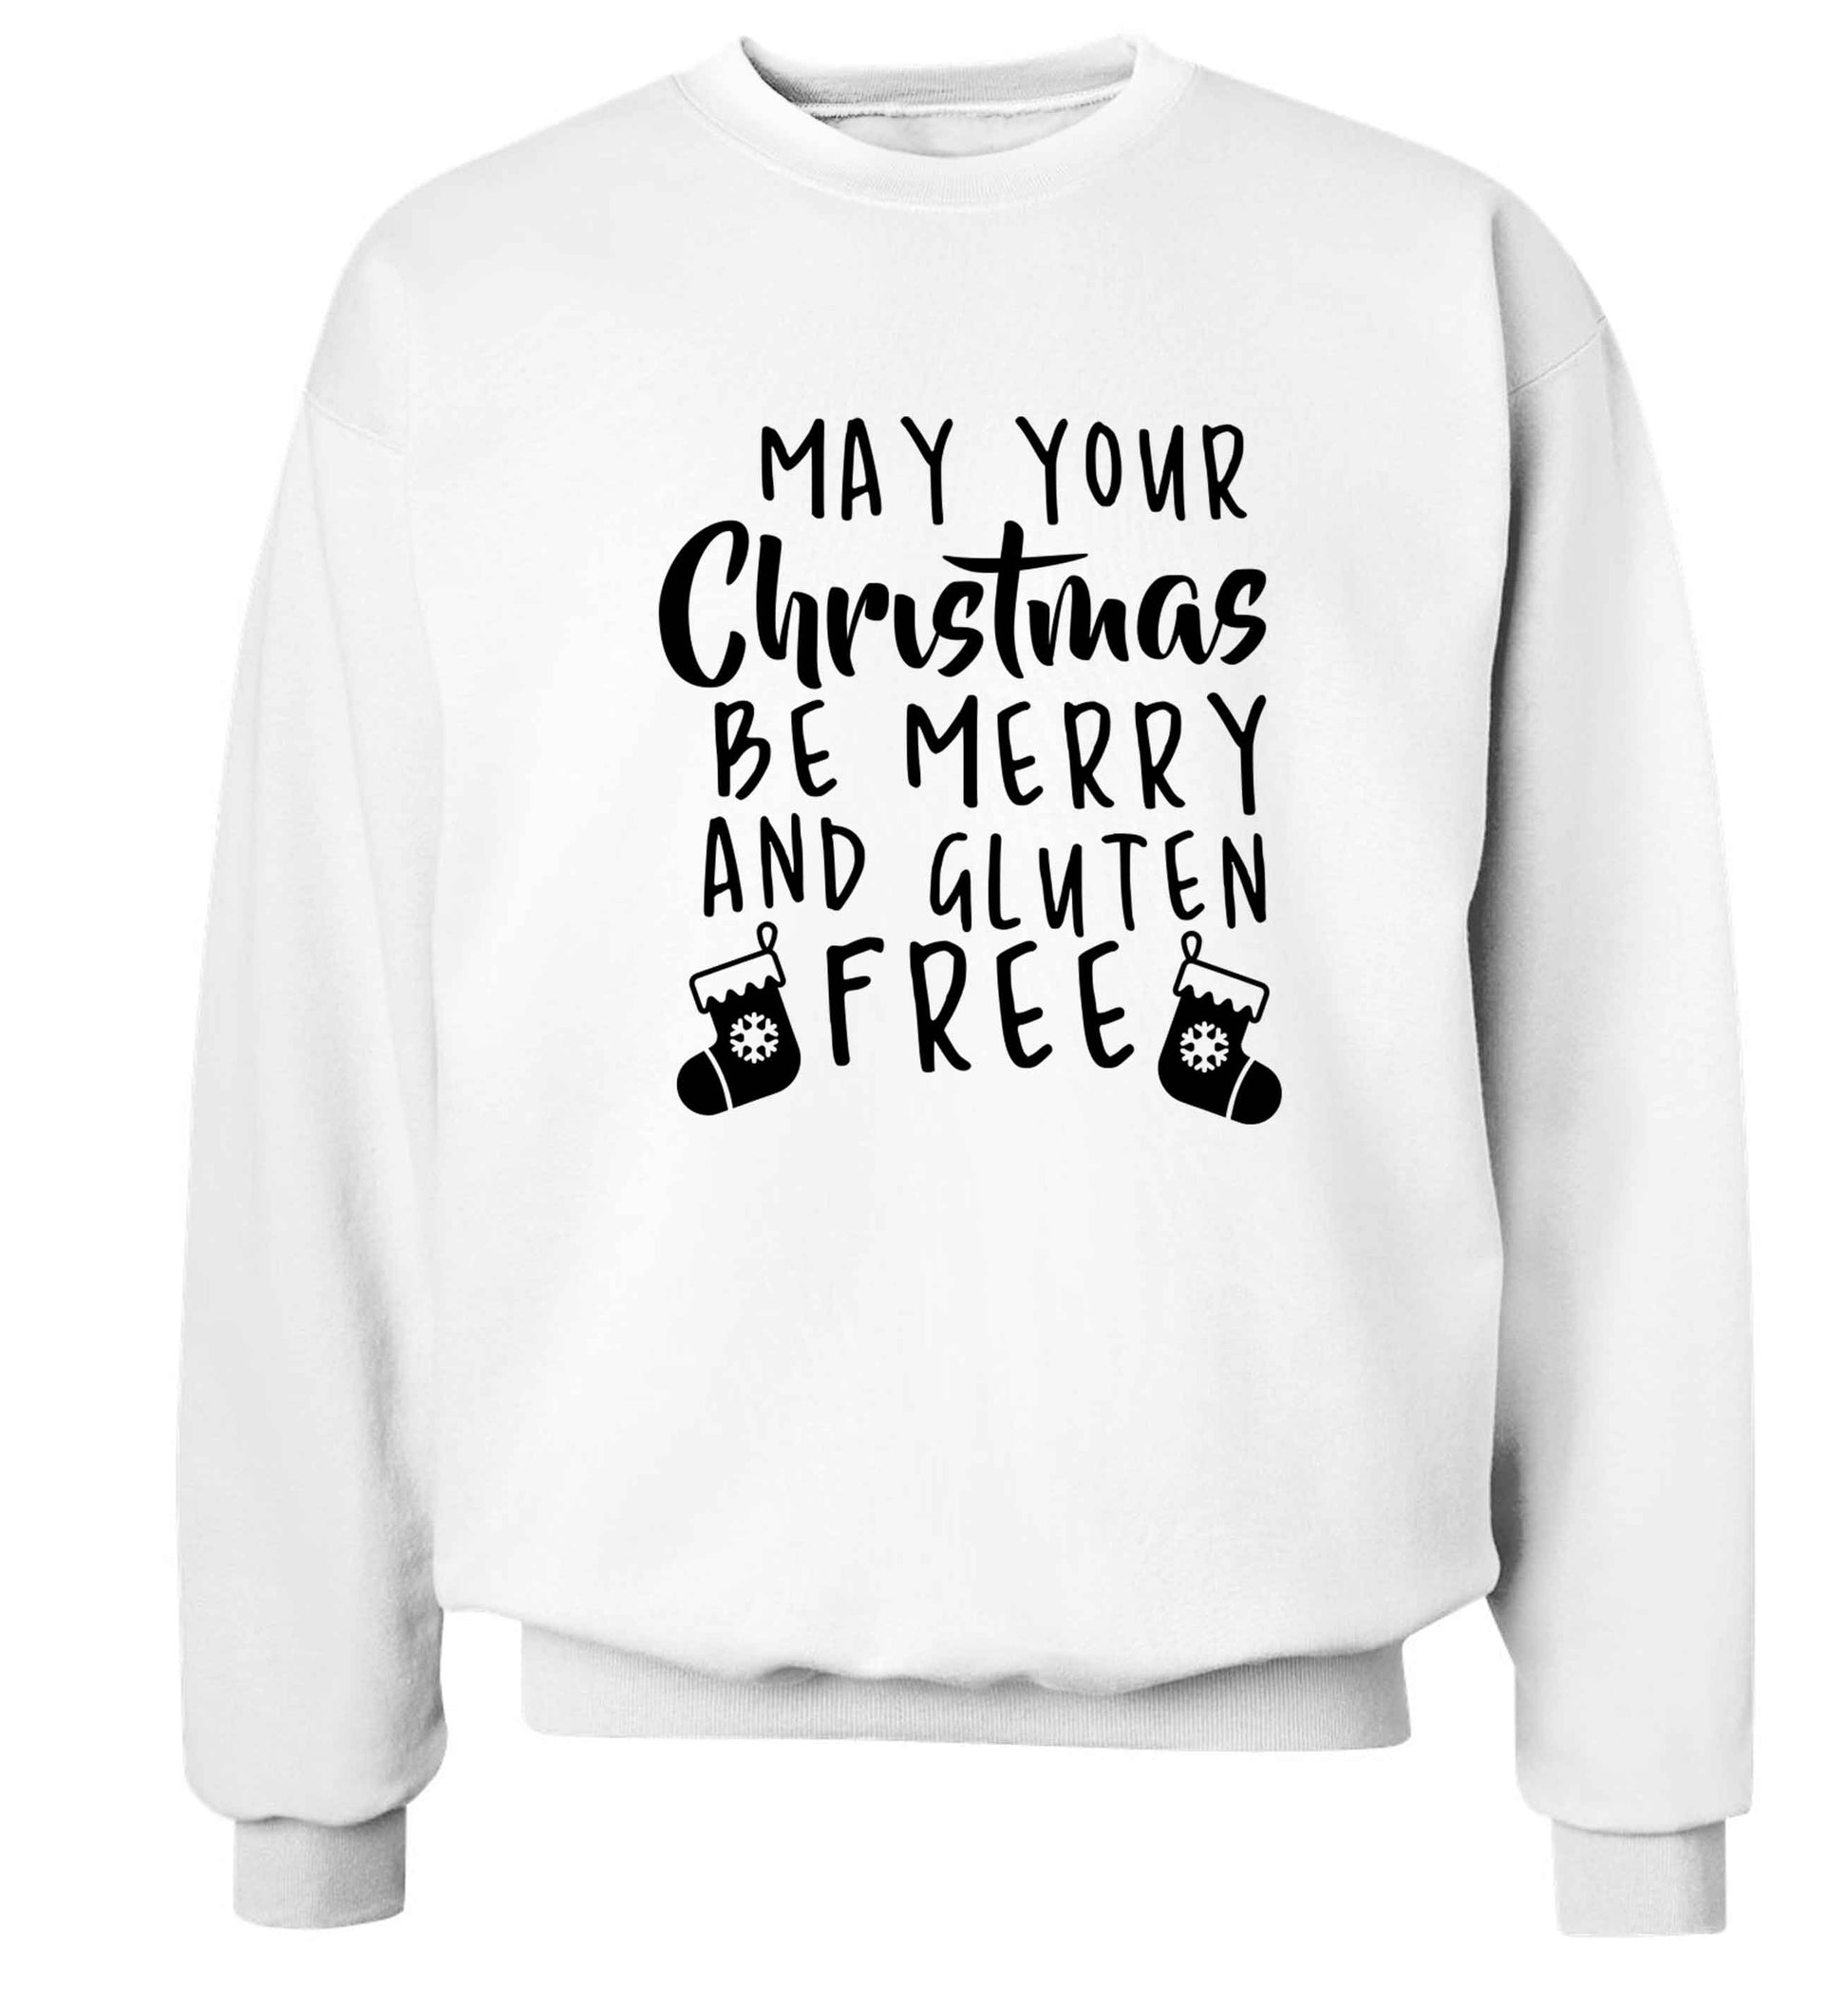 May your Christmas be merry and gluten free Adult's unisex white Sweater 2XL